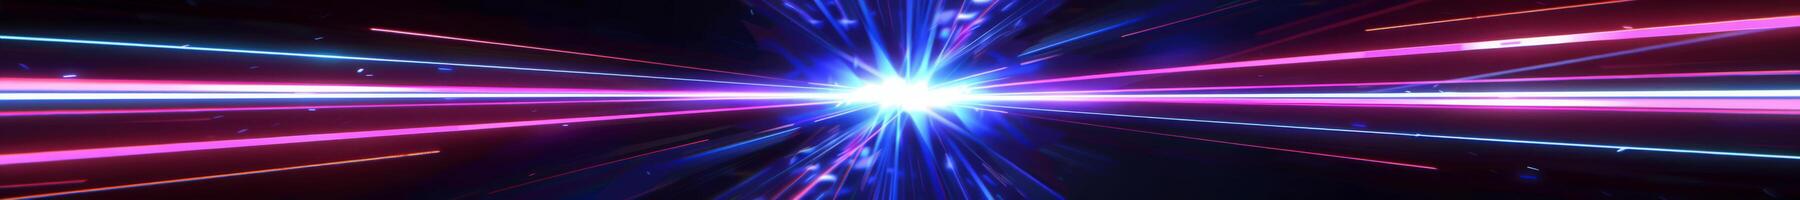 Dynamic Explosion of Red and Blue Laser Beams photo